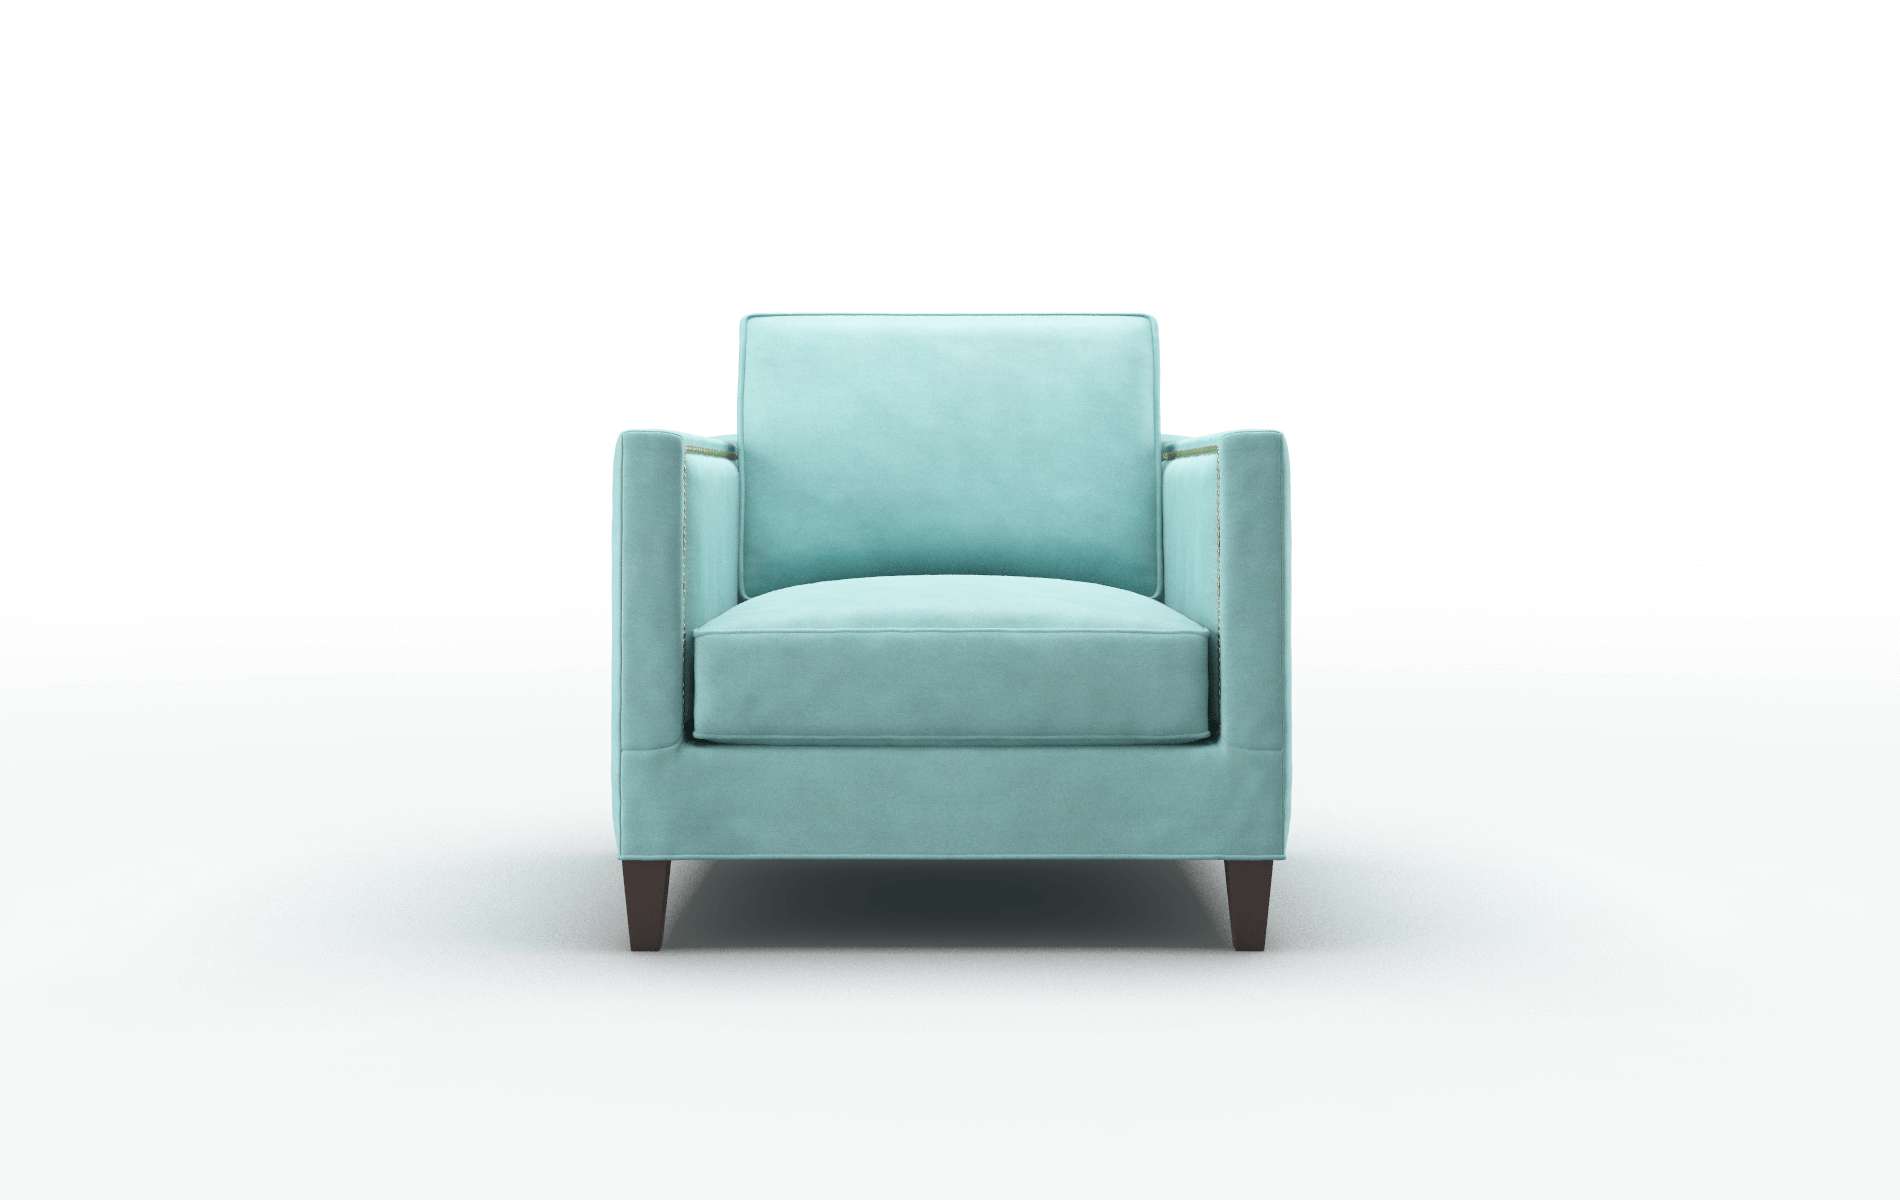 Alps Curious Turquoise Chair espresso legs 1